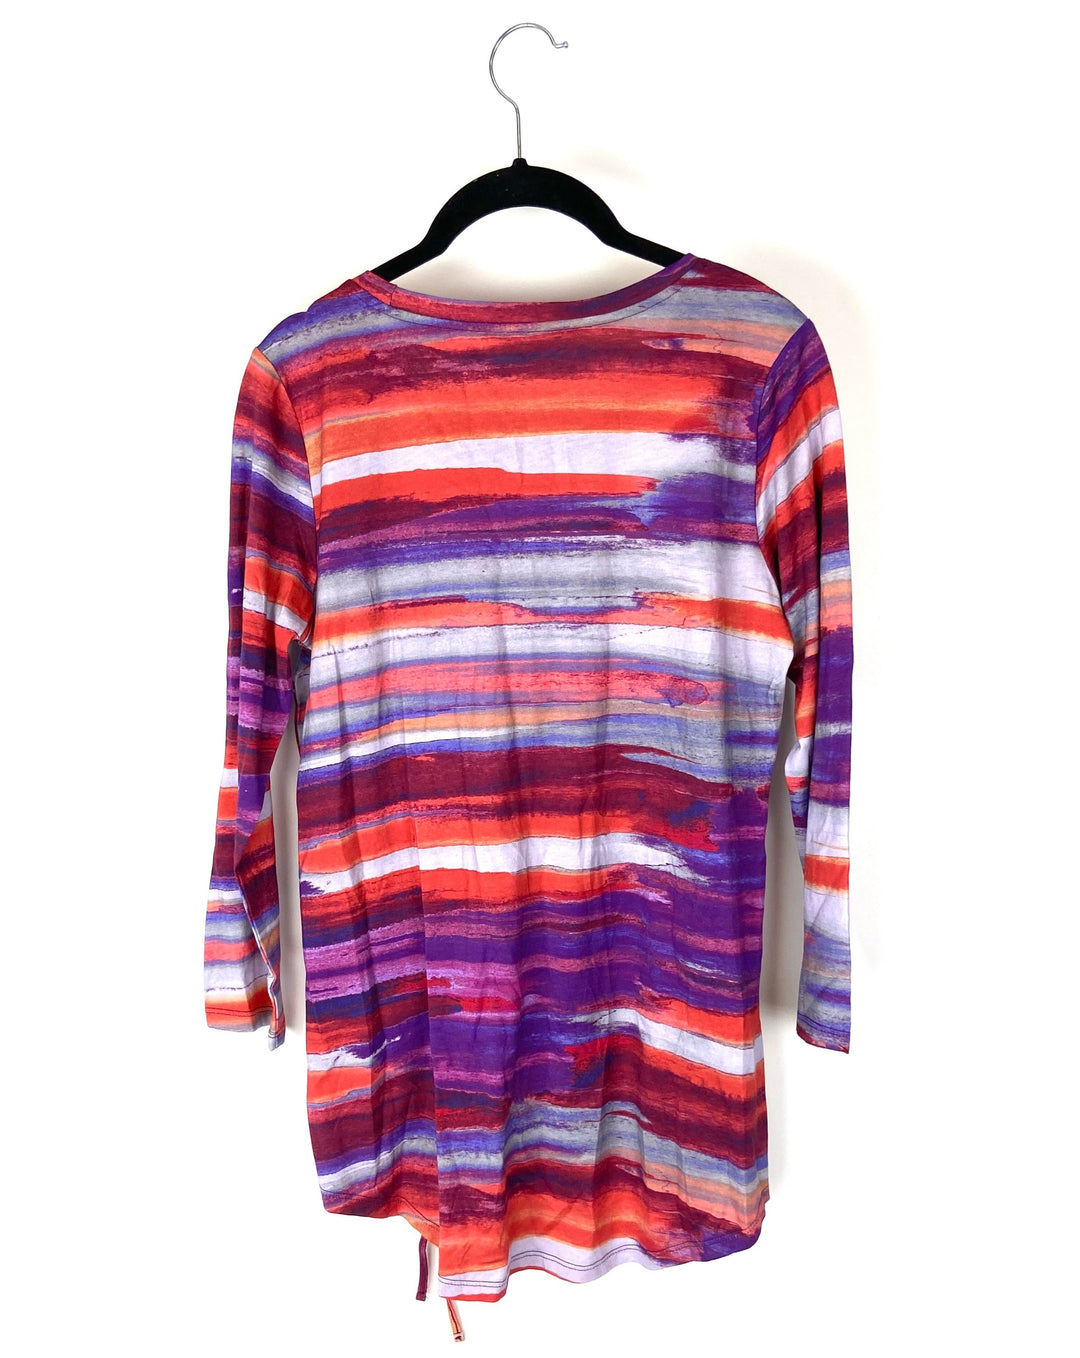 Striped 3/4 Sleeve Top - Size 2-4